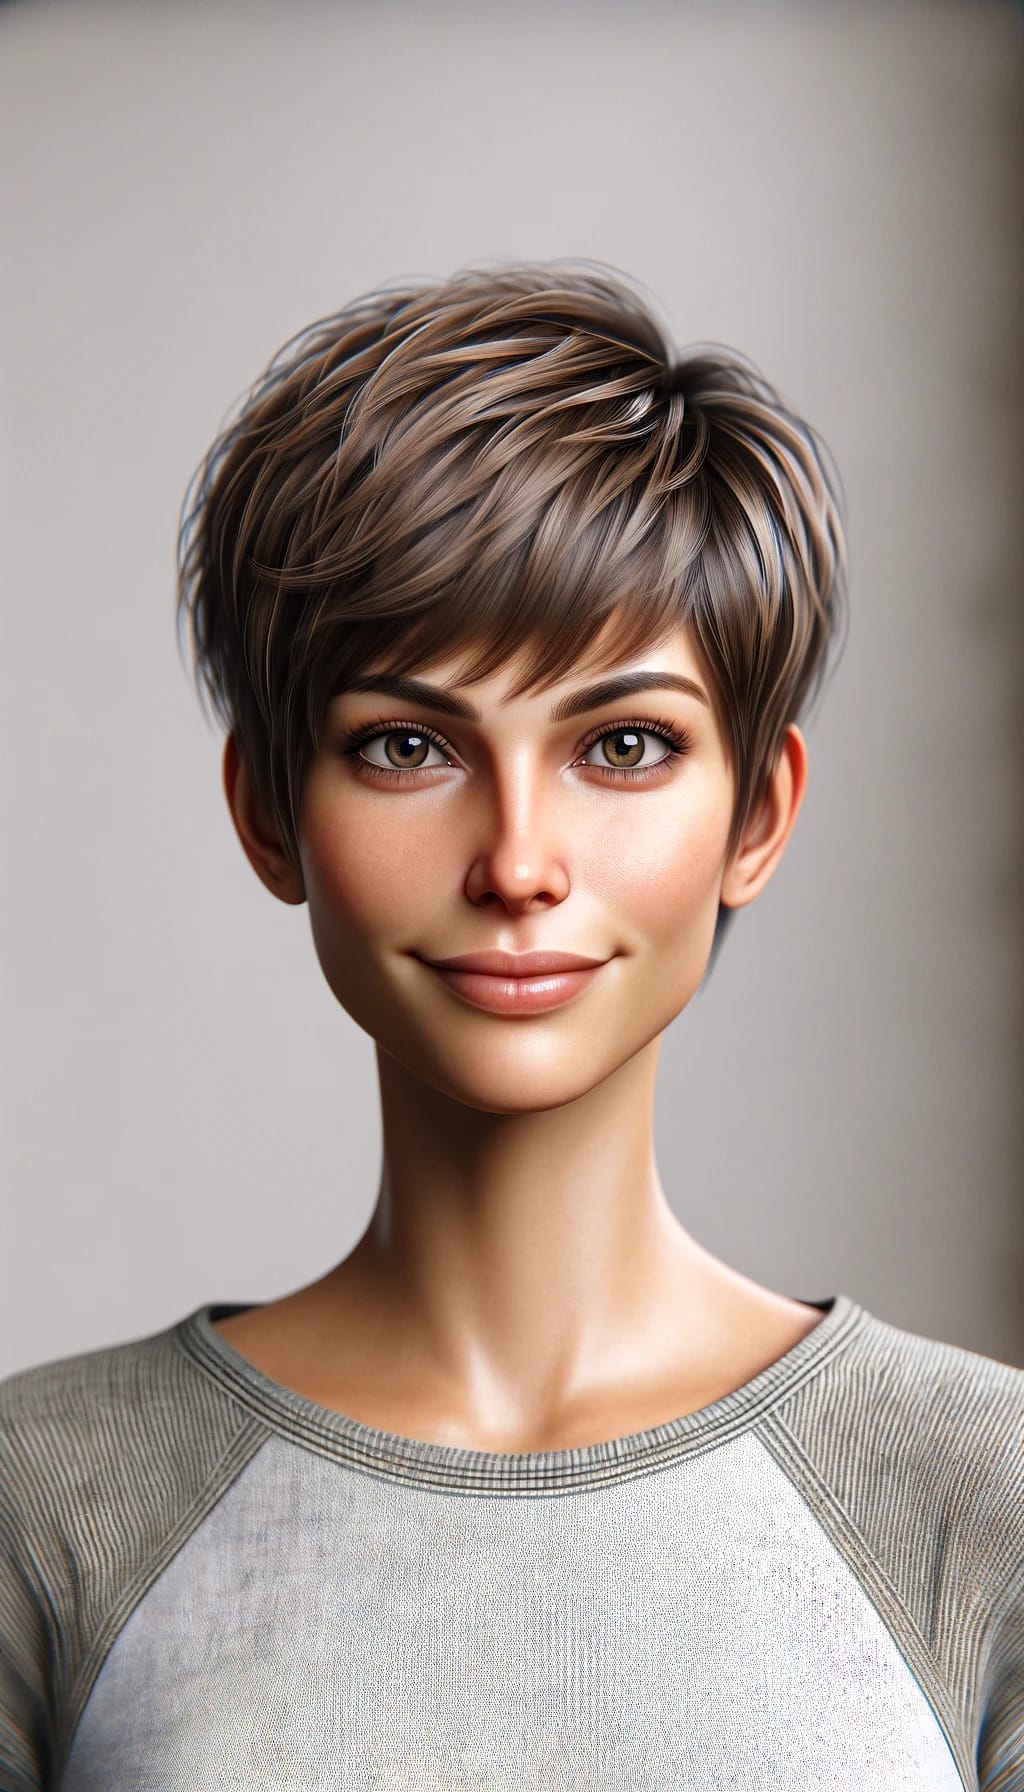 casual pixie cut hairstyle featuring short bangs